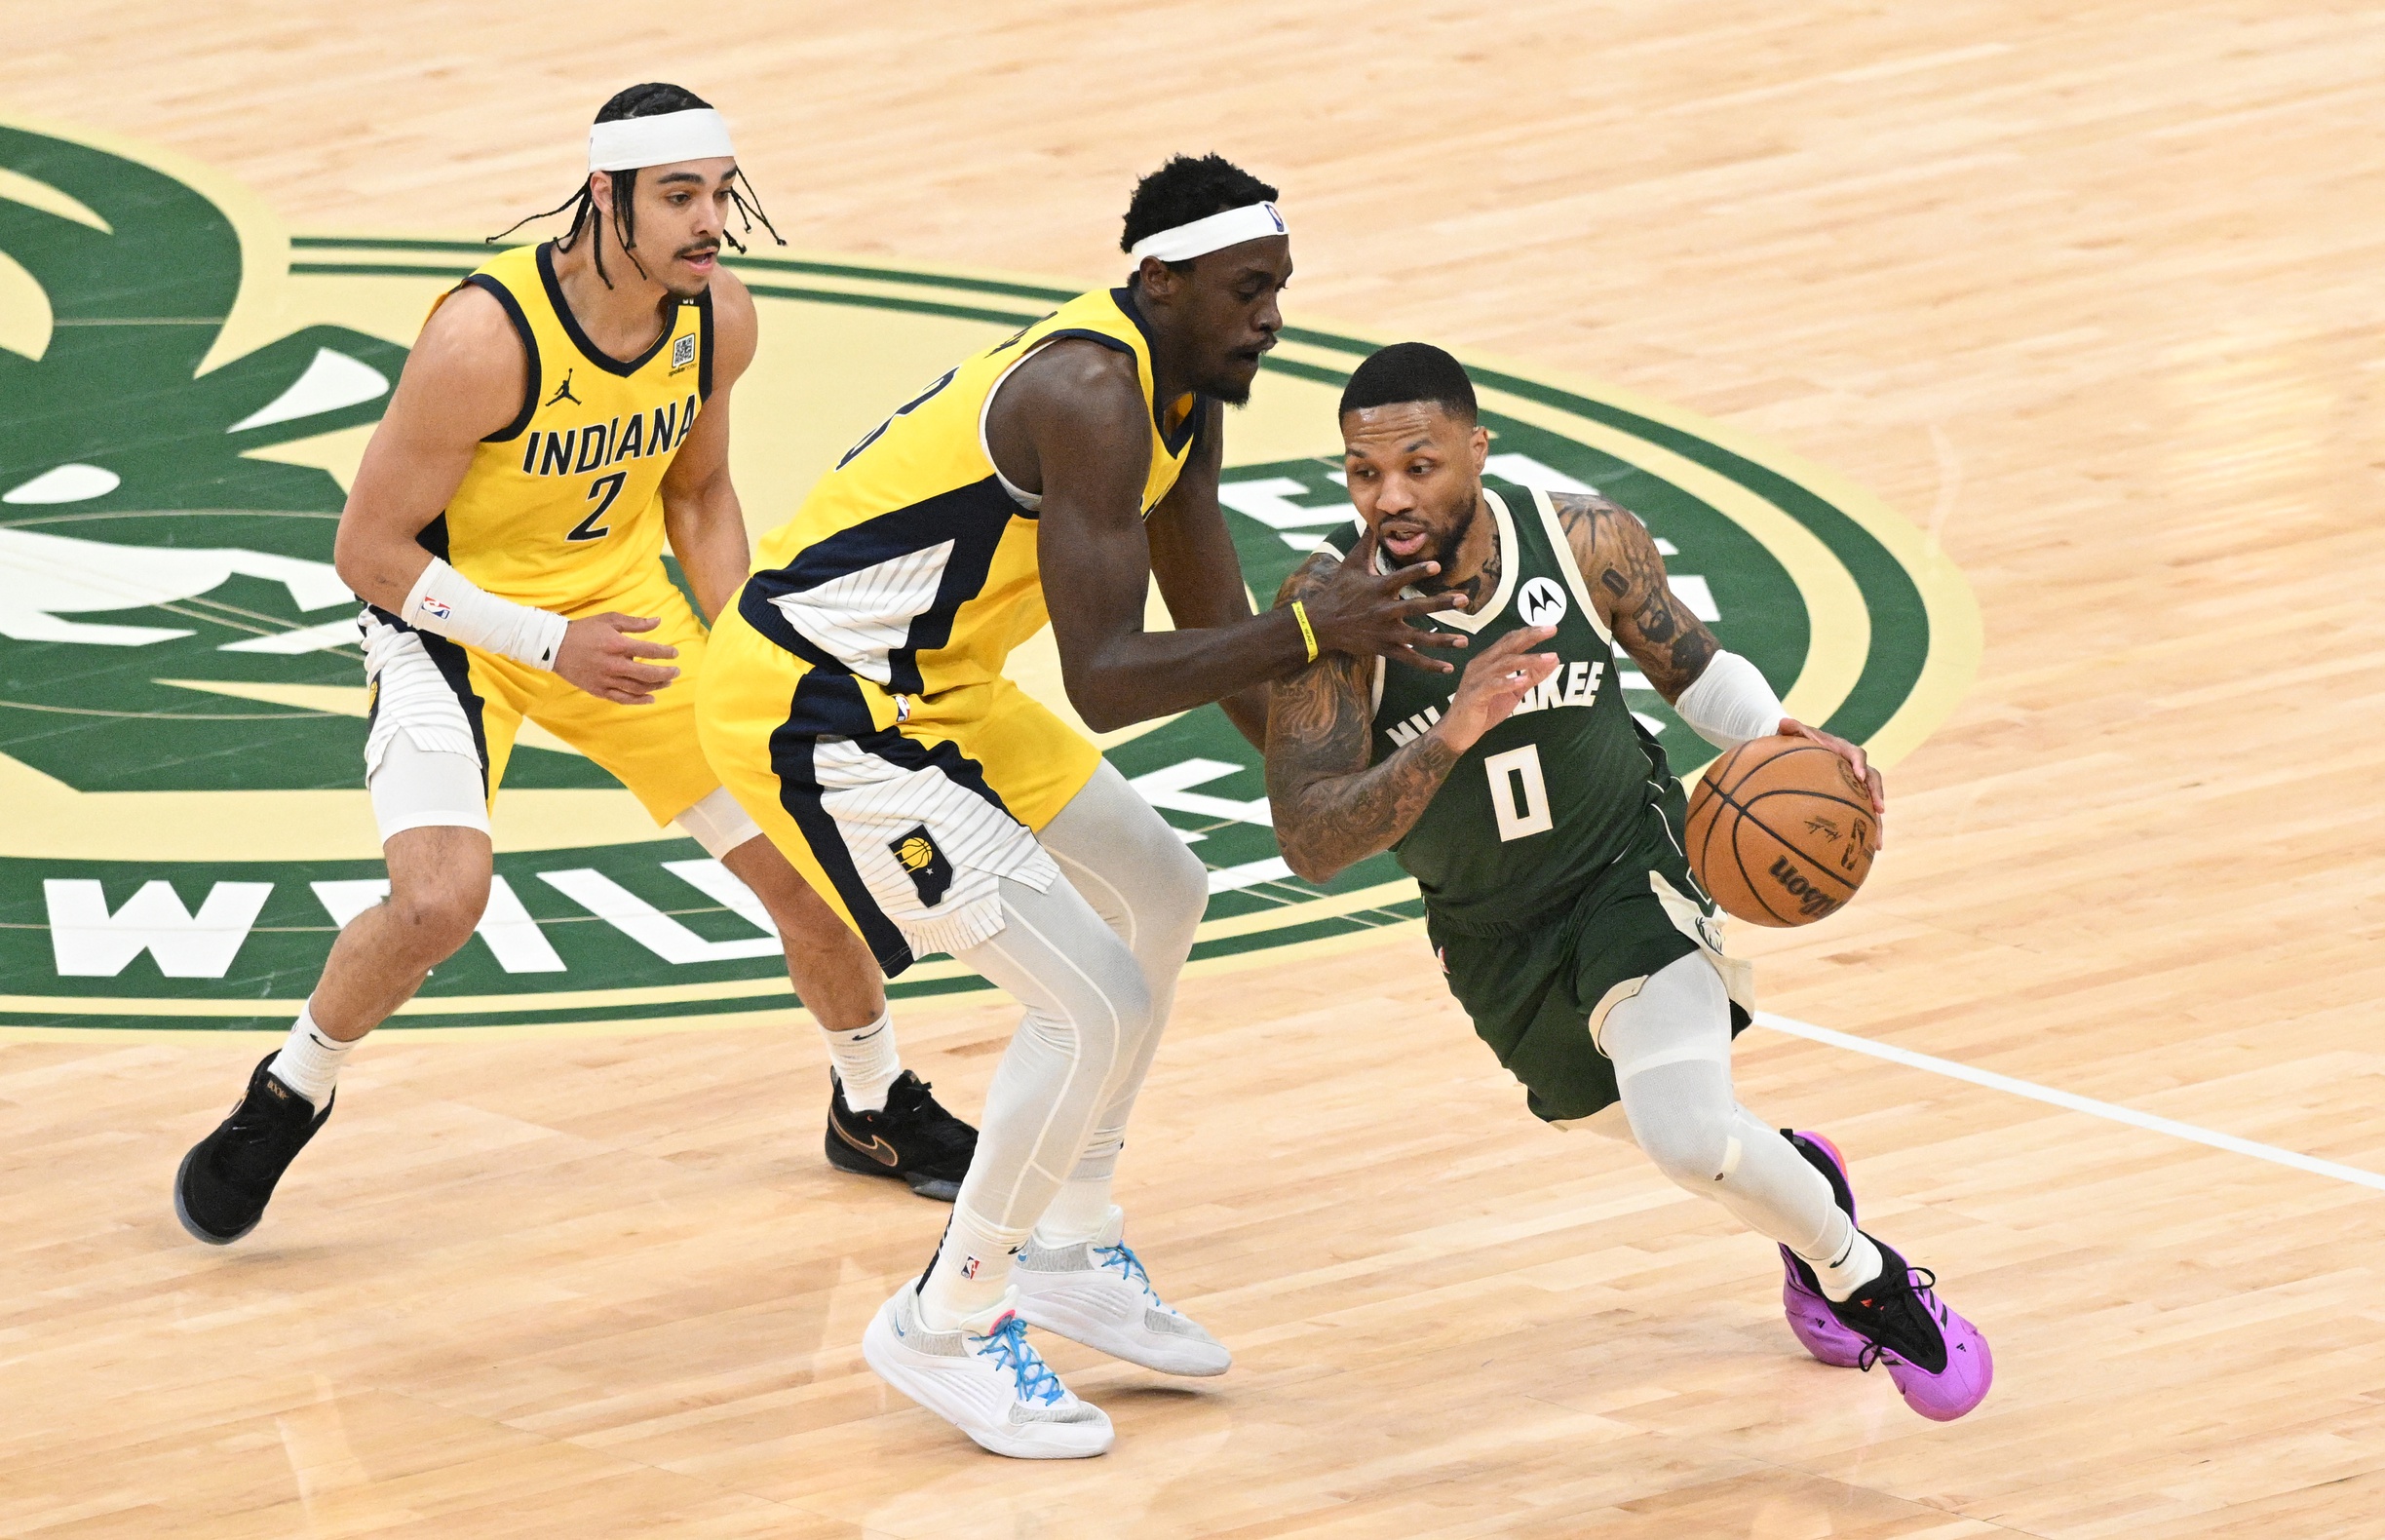 Bucks Star Calls Out Pacers as "Frontrunners"